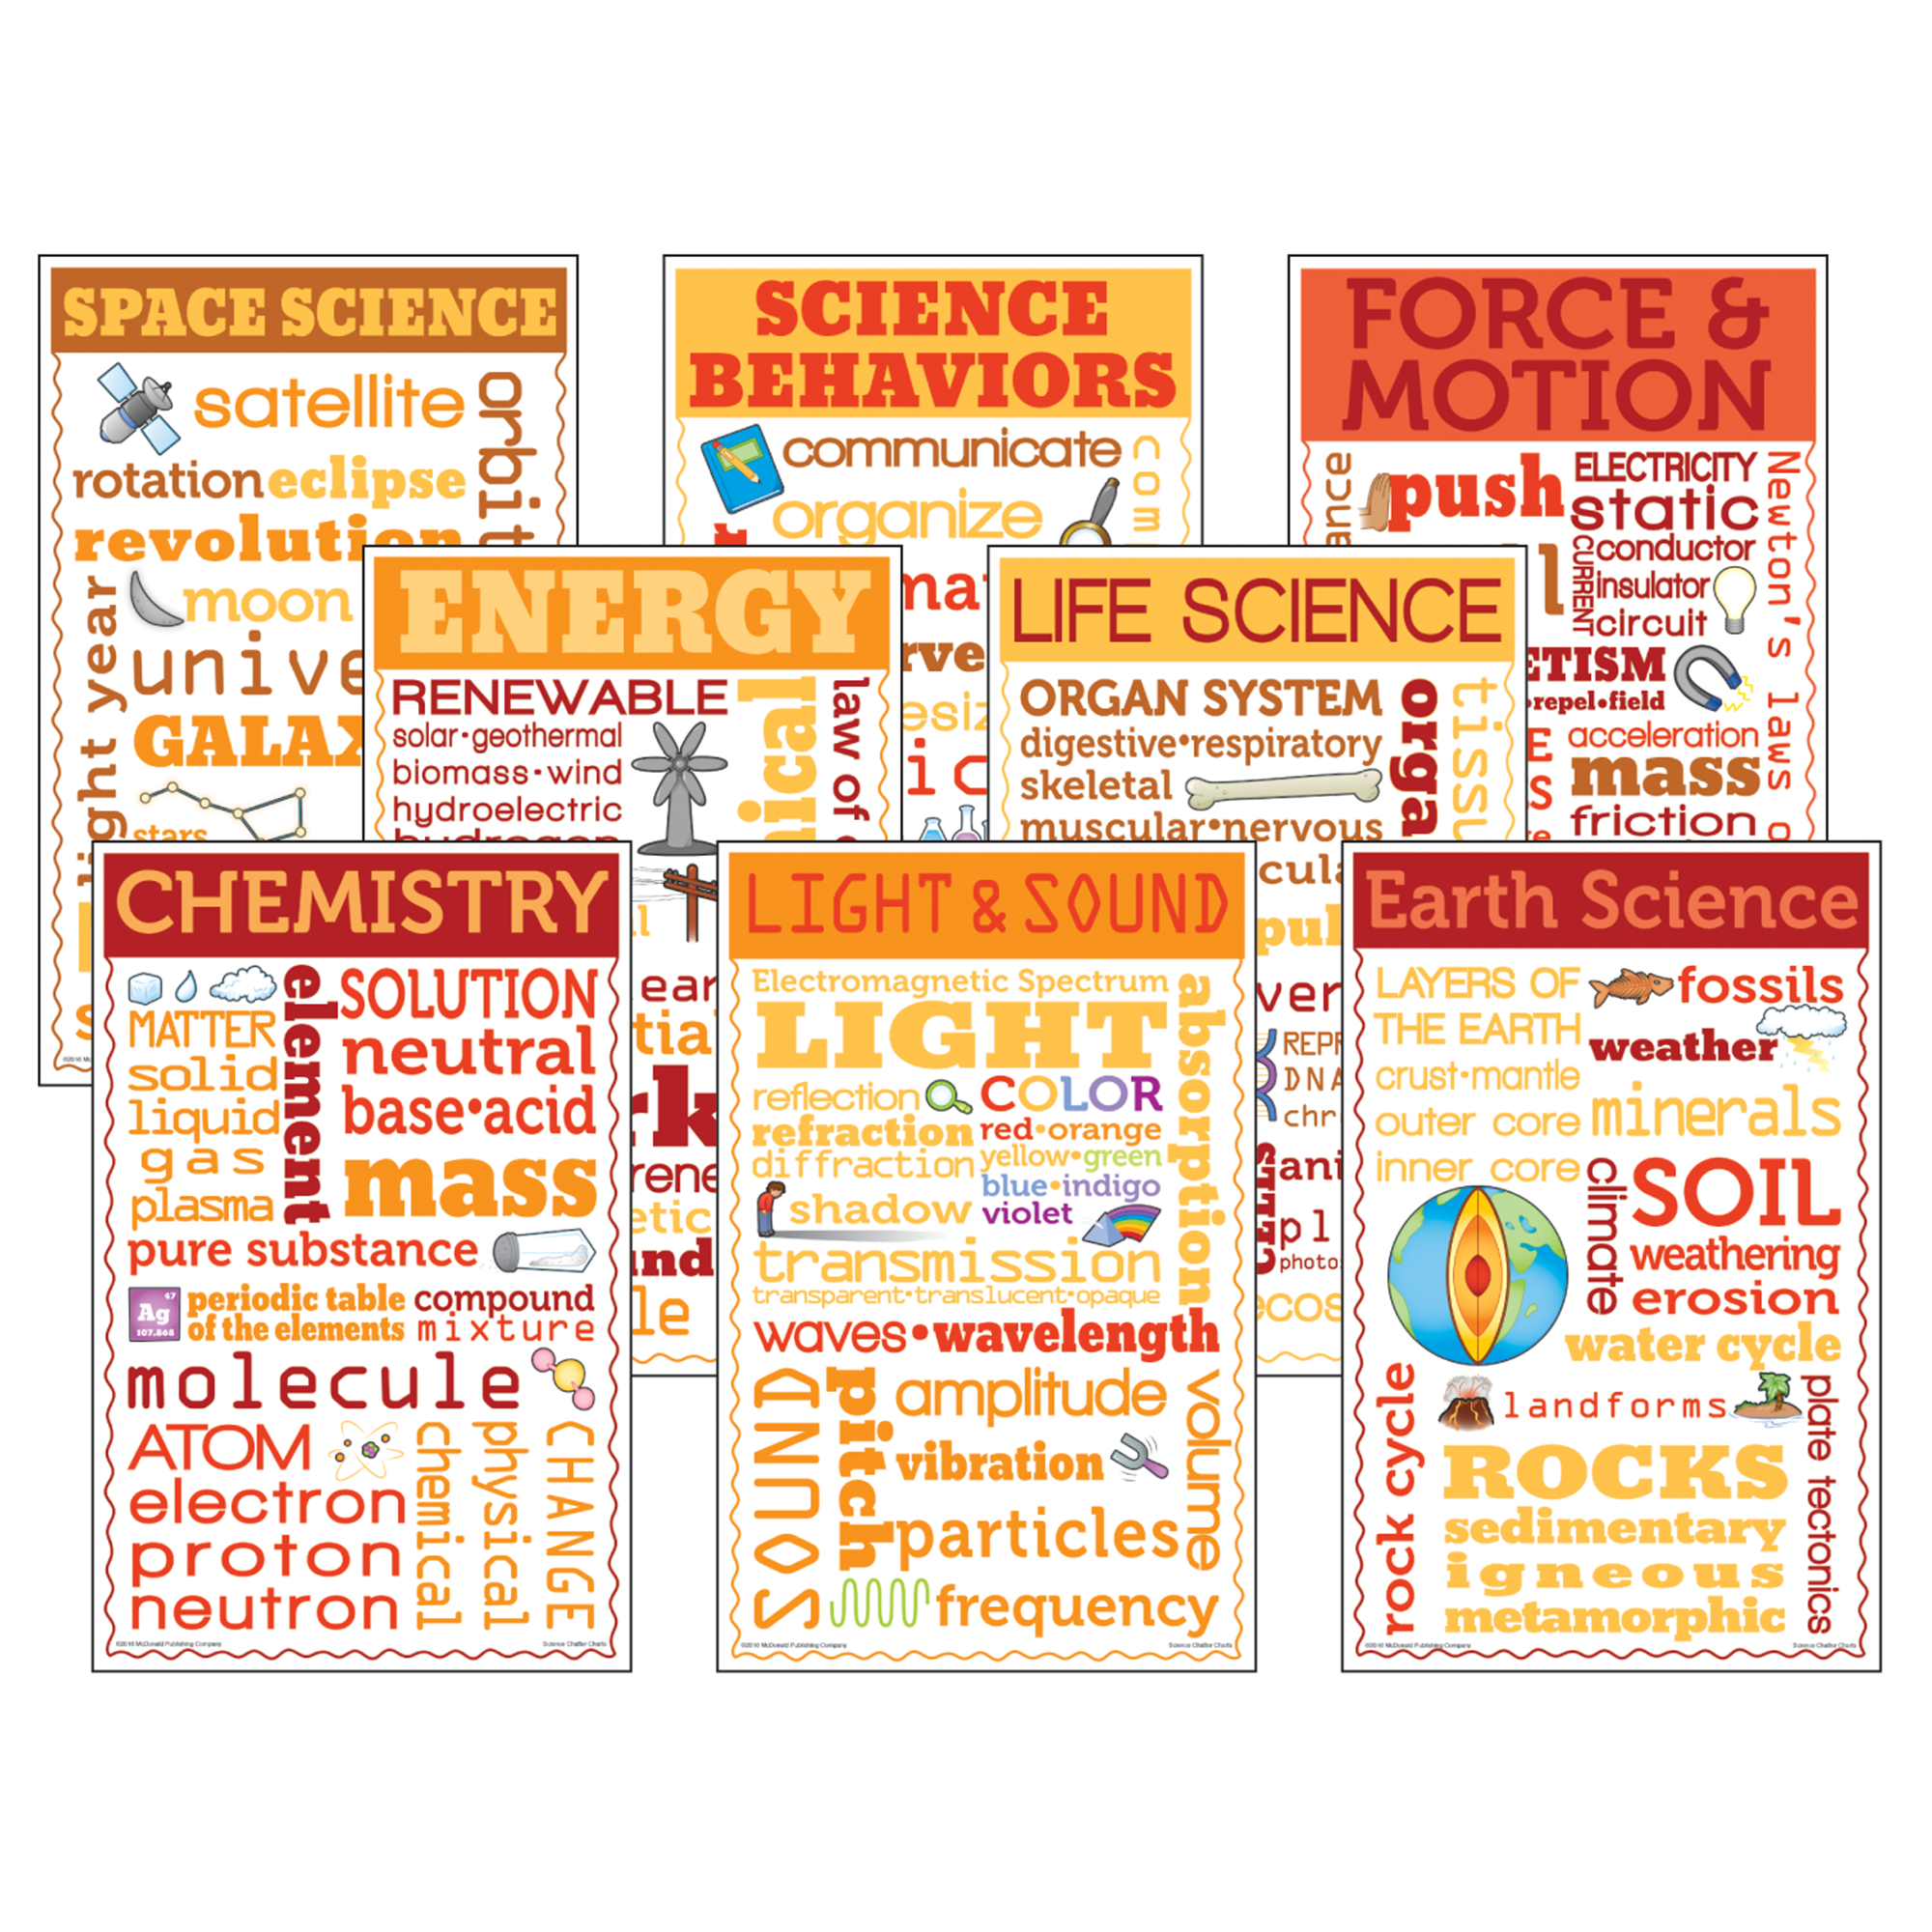 These posters effectively combine words and illustrations related to these important science topics: force & motion, light & sound, energy, chemistry, life science, earth science, space science, and science behaviors. The set contains eight 11" x 17" posters.